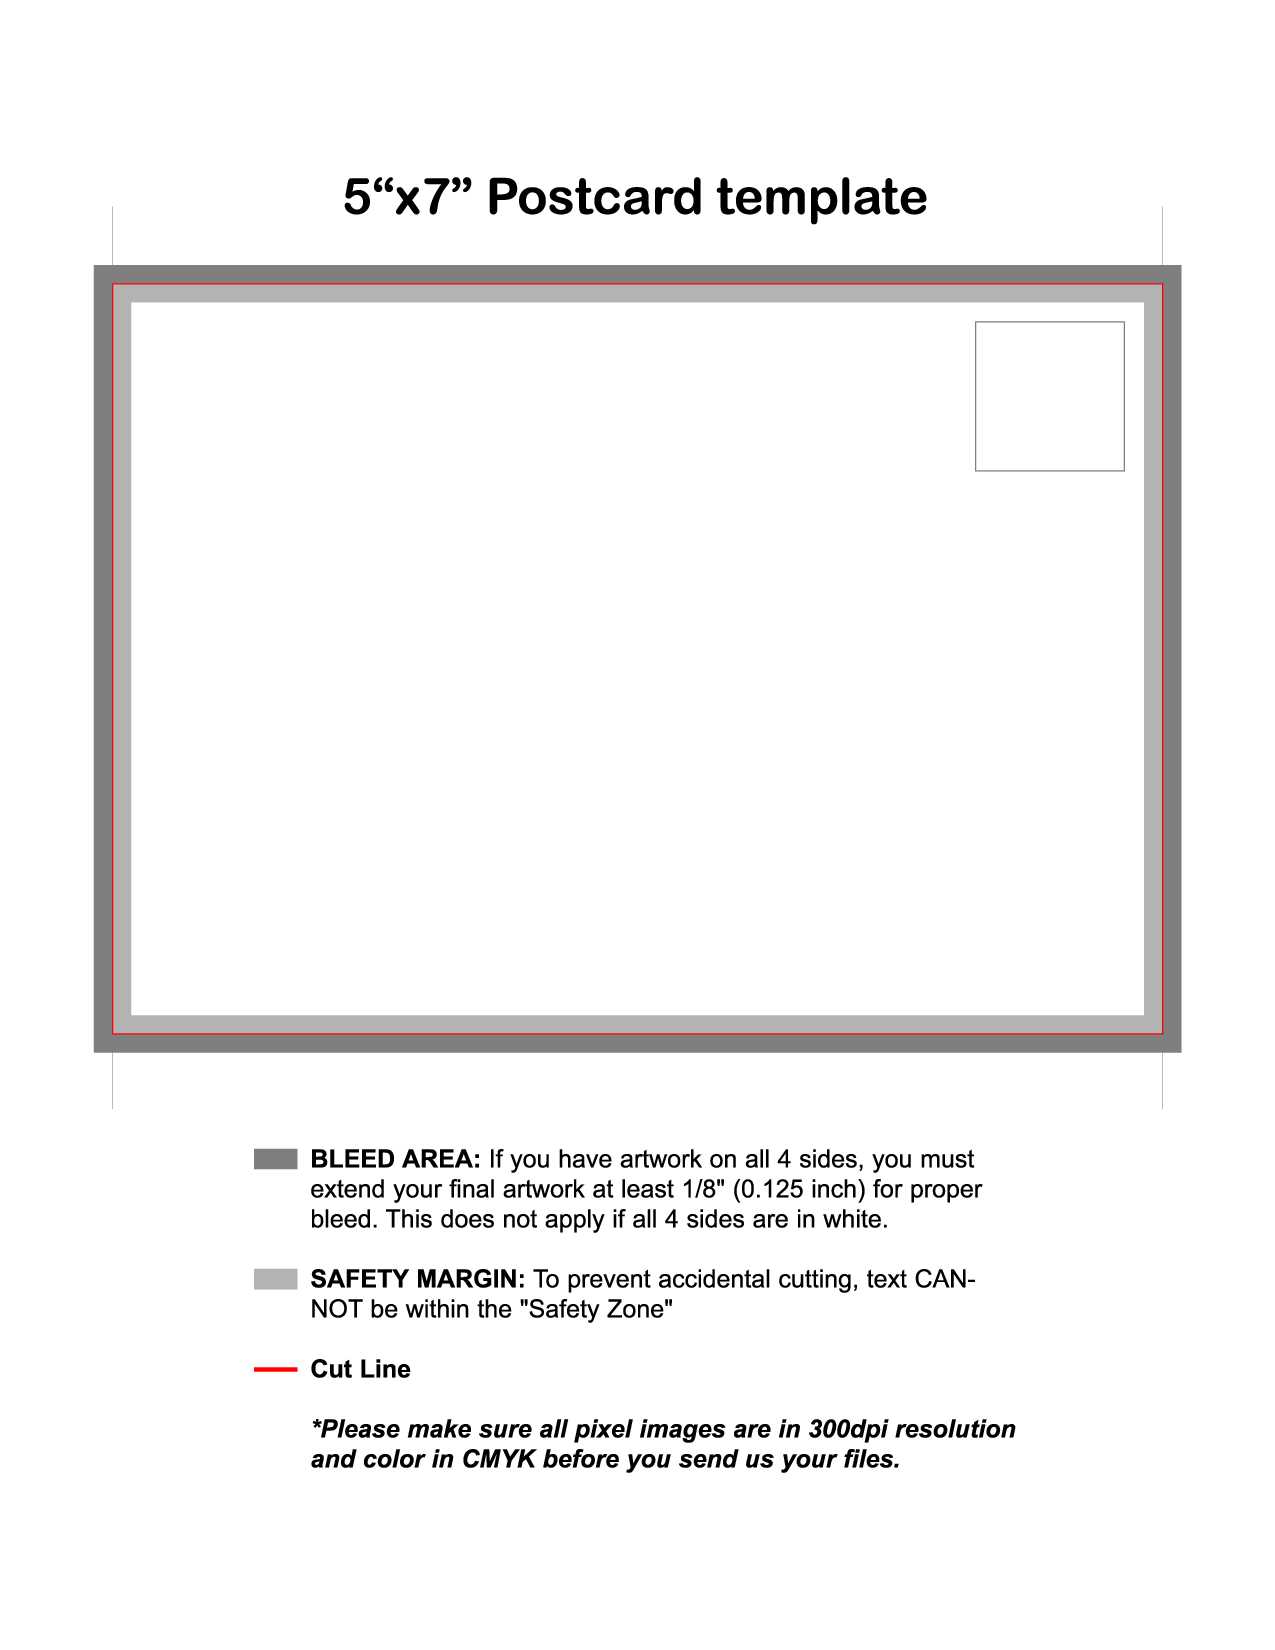 Equity Fax Template Word 2010 – Takub Throughout Fax Template Word 2010